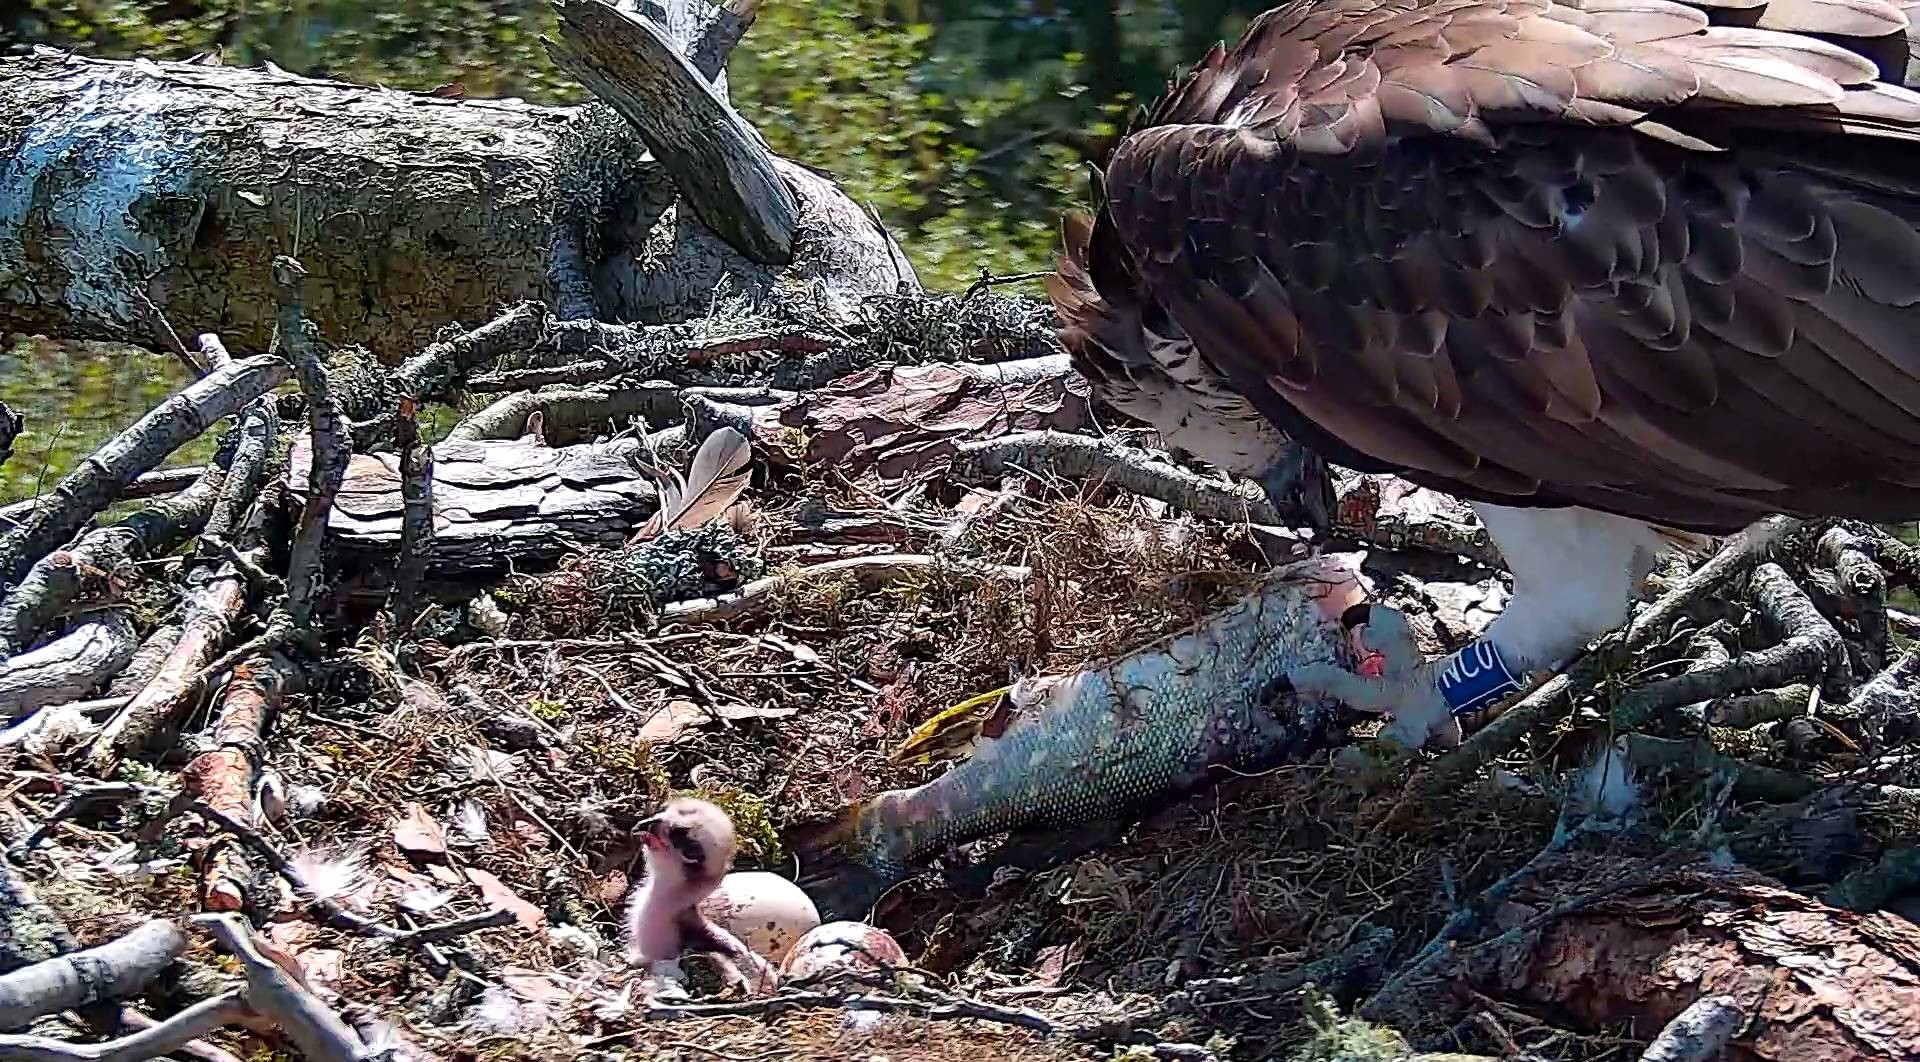 A young male 'Jack' pike being eaten by an osprey on its nest.